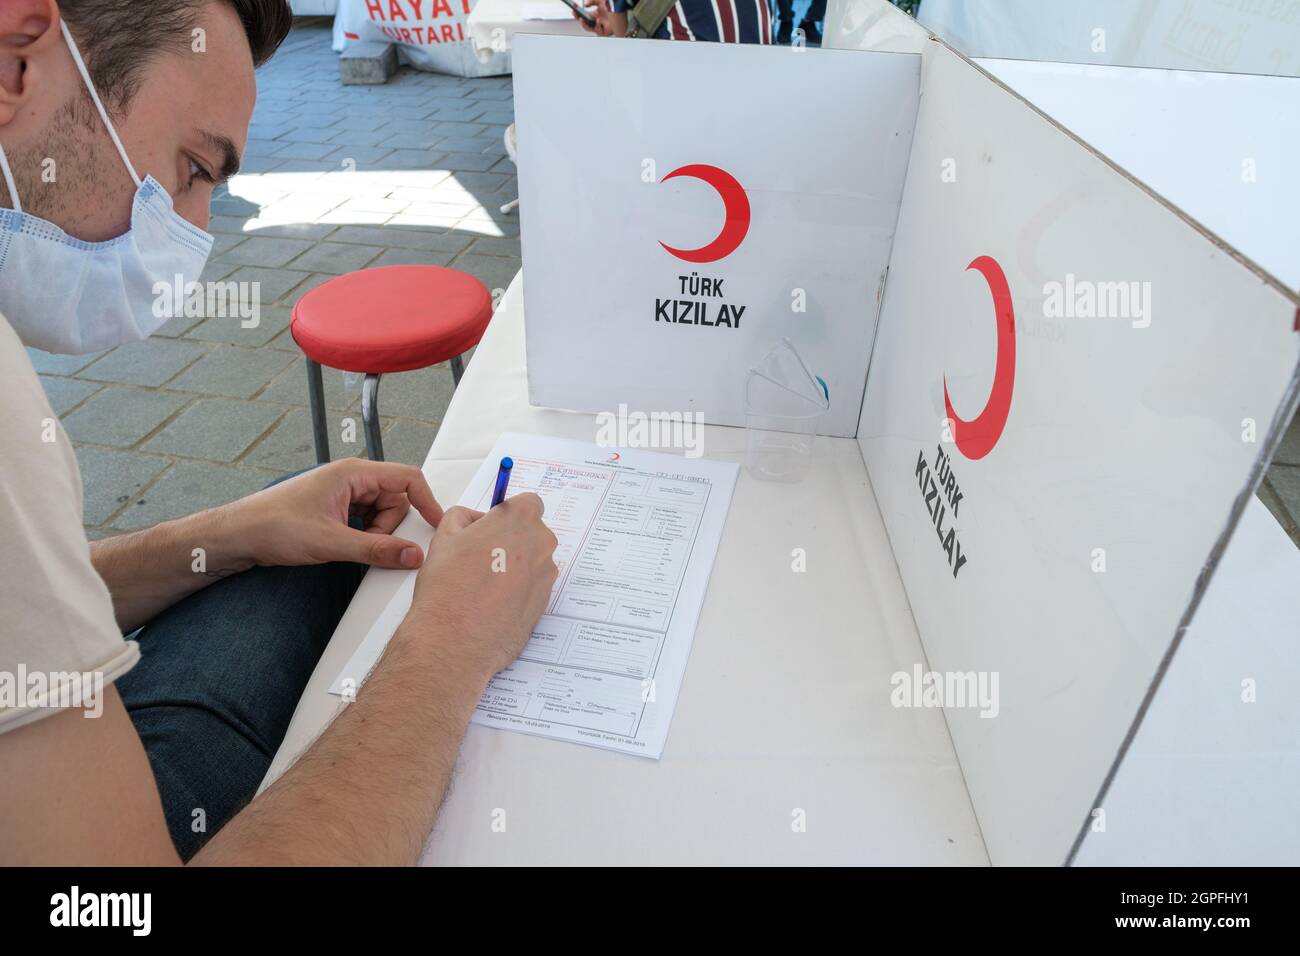 Eminonu, Istanbul, Turkey - 07.05.2021: close up detail of a blood donation male volunteer signing official approval document on a table under a tent Stock Photo